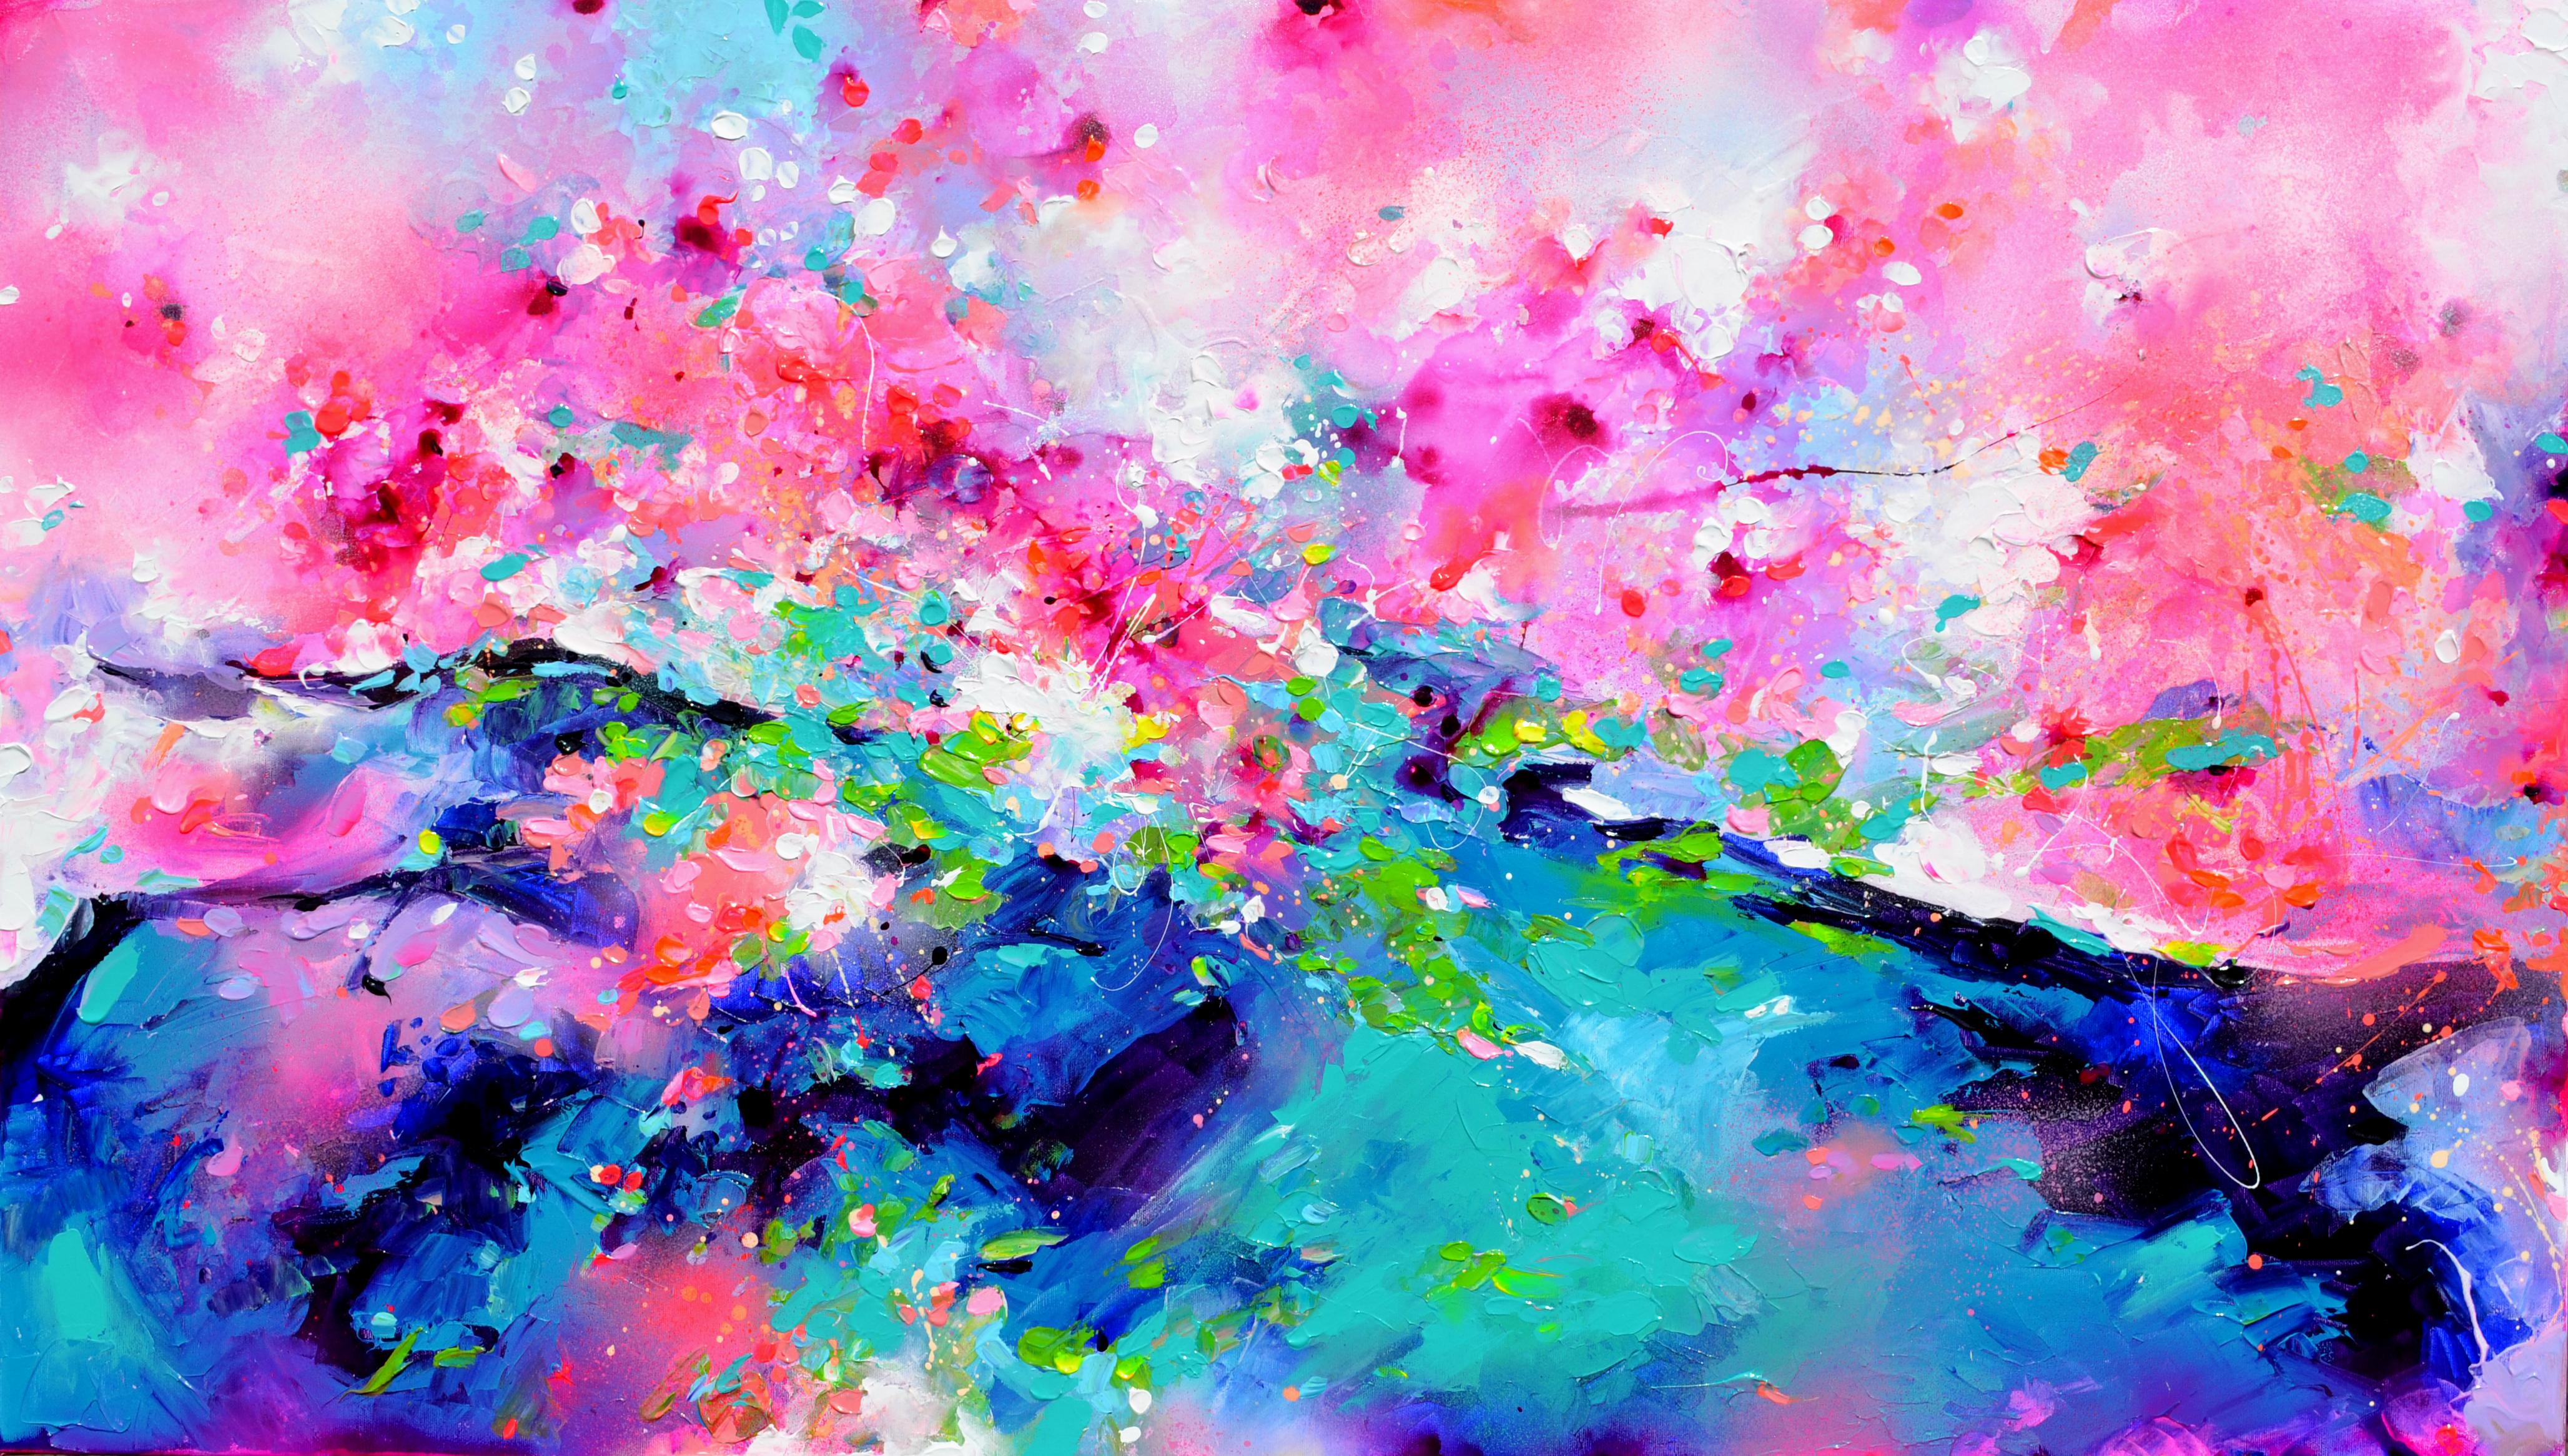 Soos Roxana Gabriela Interior Painting - Fresh Moods 91 - Large Abstract Purple Pink and Blue Painting